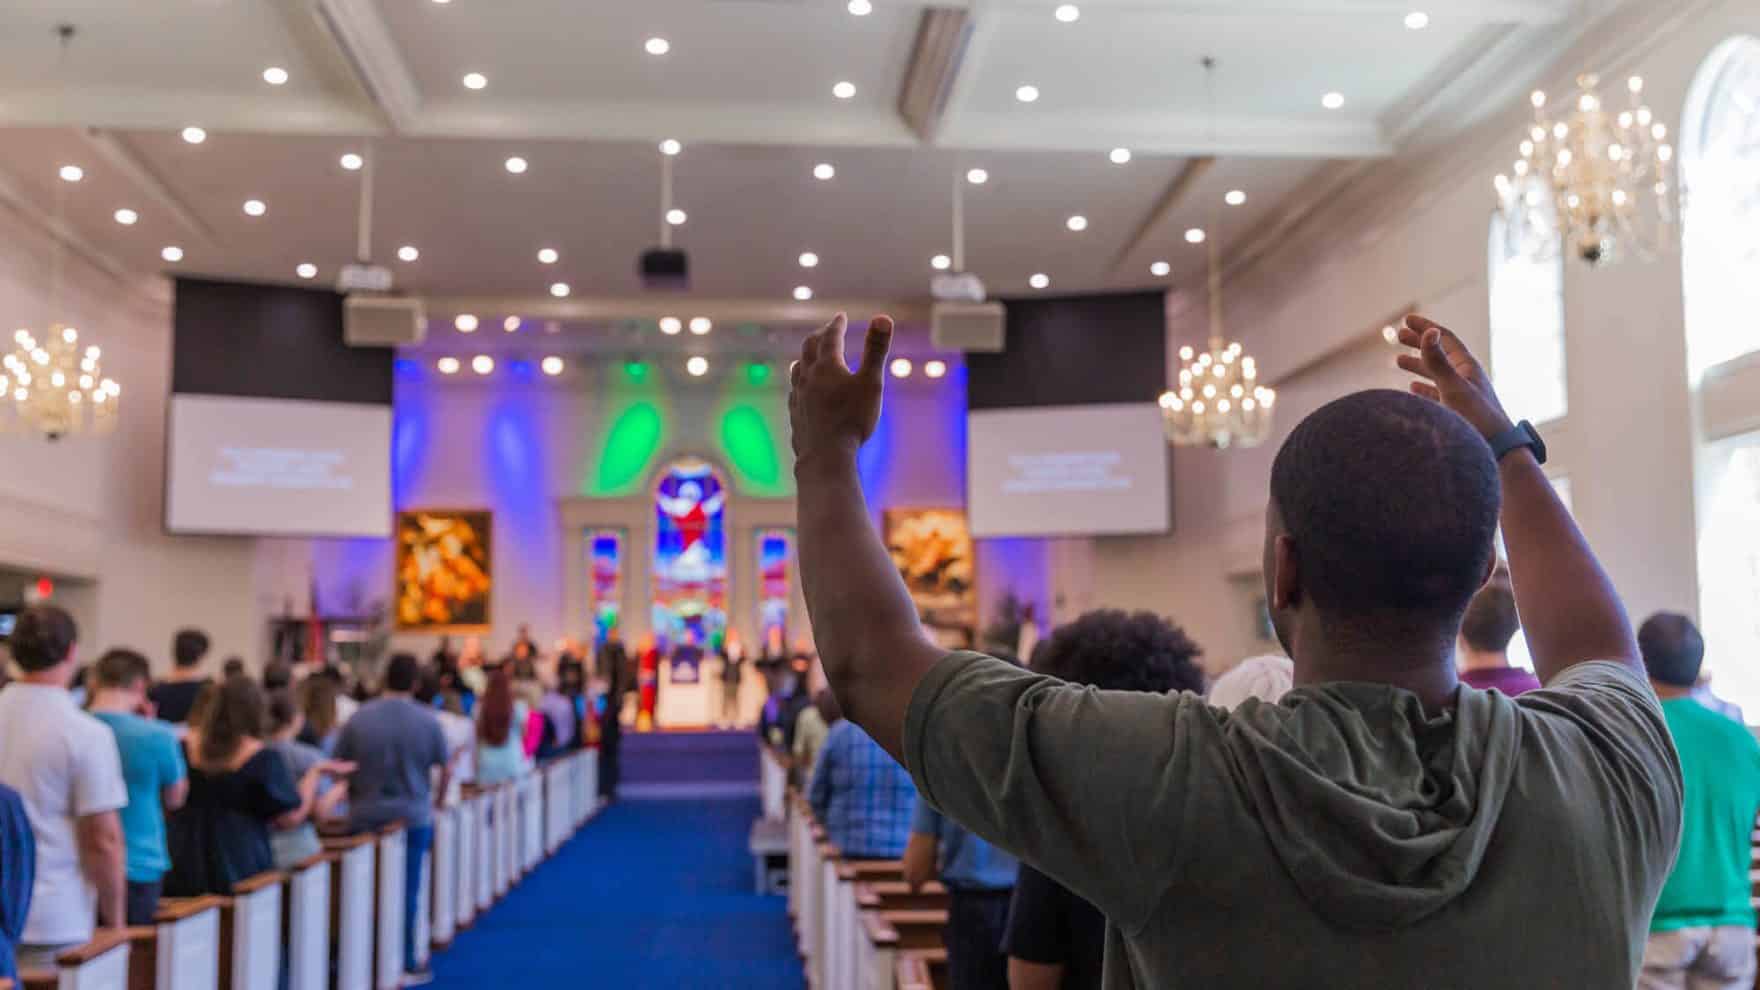 A person with arms outstretched at Regent University’s chapel in Virginia Beach.